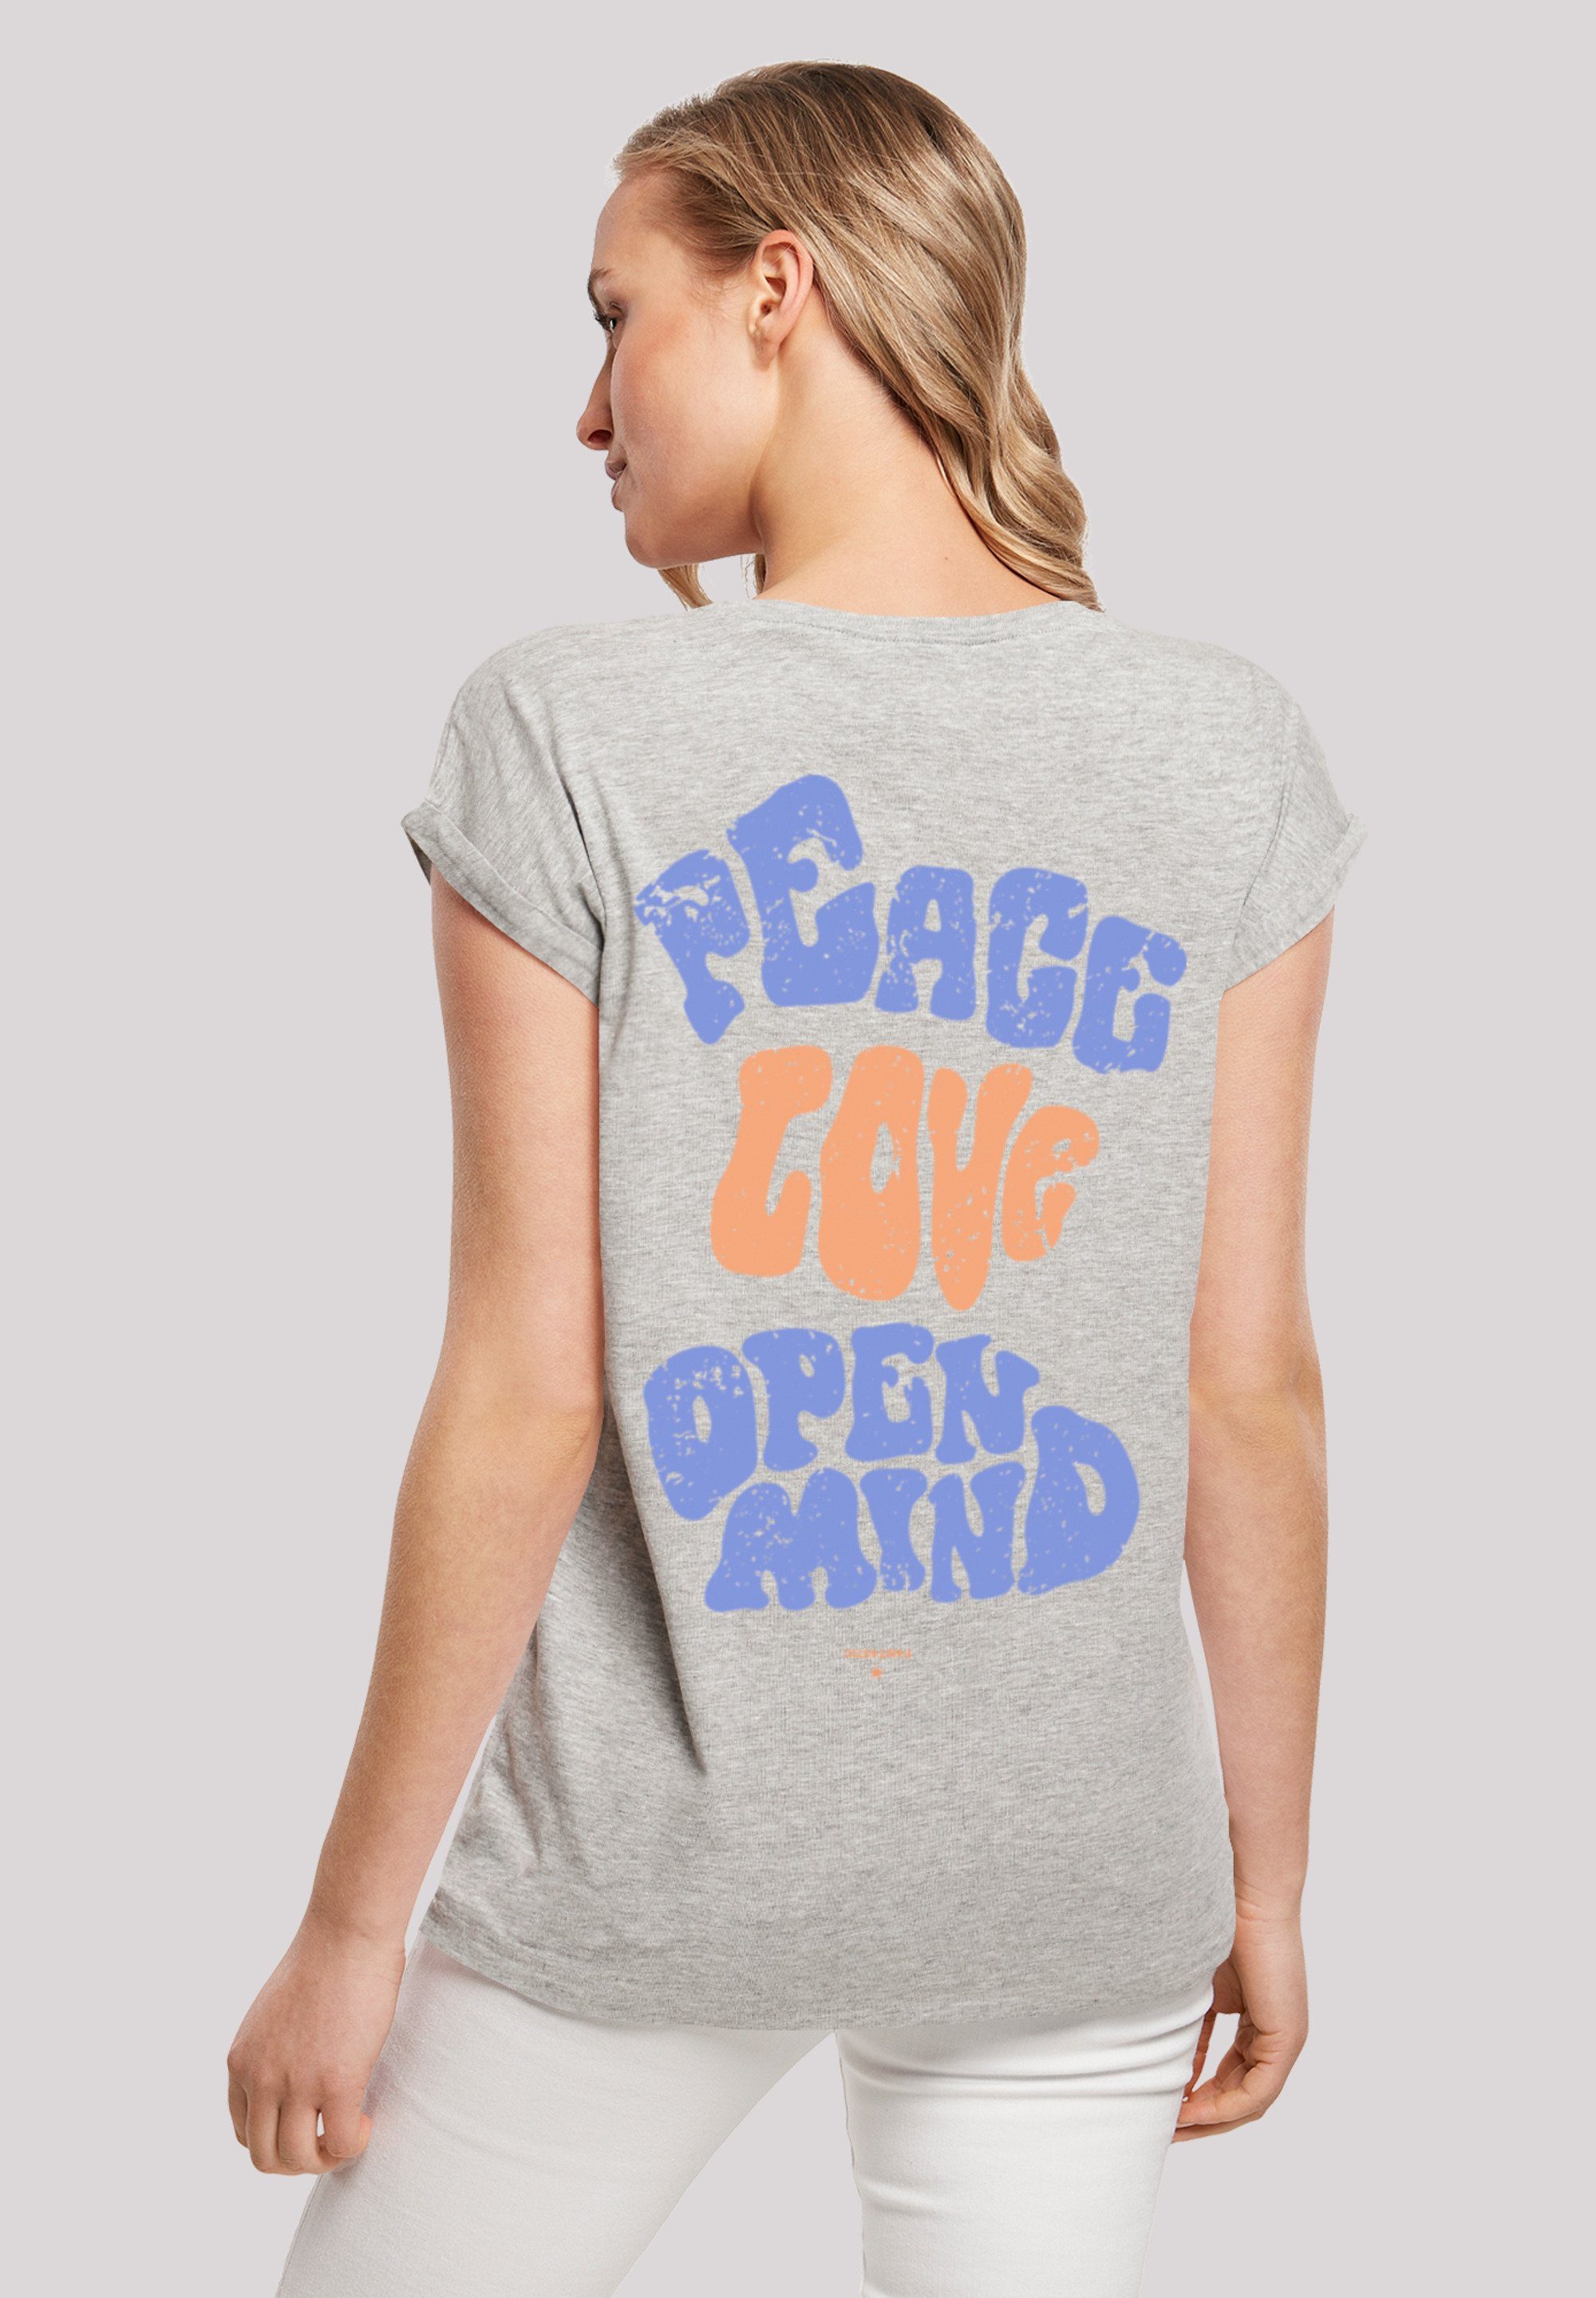 F4NT4STIC T-Shirt Peace Love and Open Mind Print